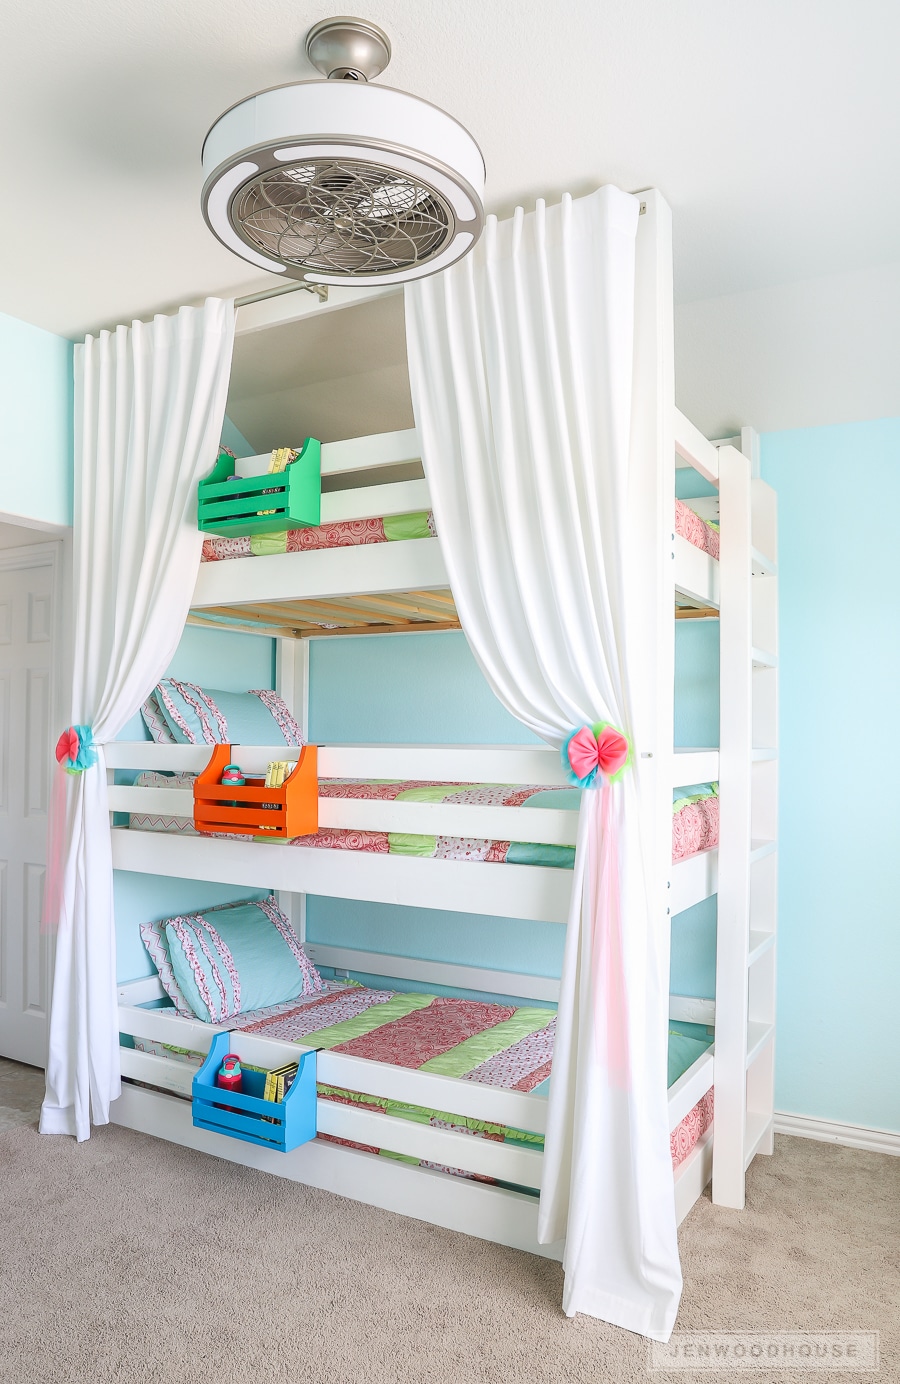 How To Build A Diy Triple Bunk Bed, 3 Tier Bunk Beds With Mattresses